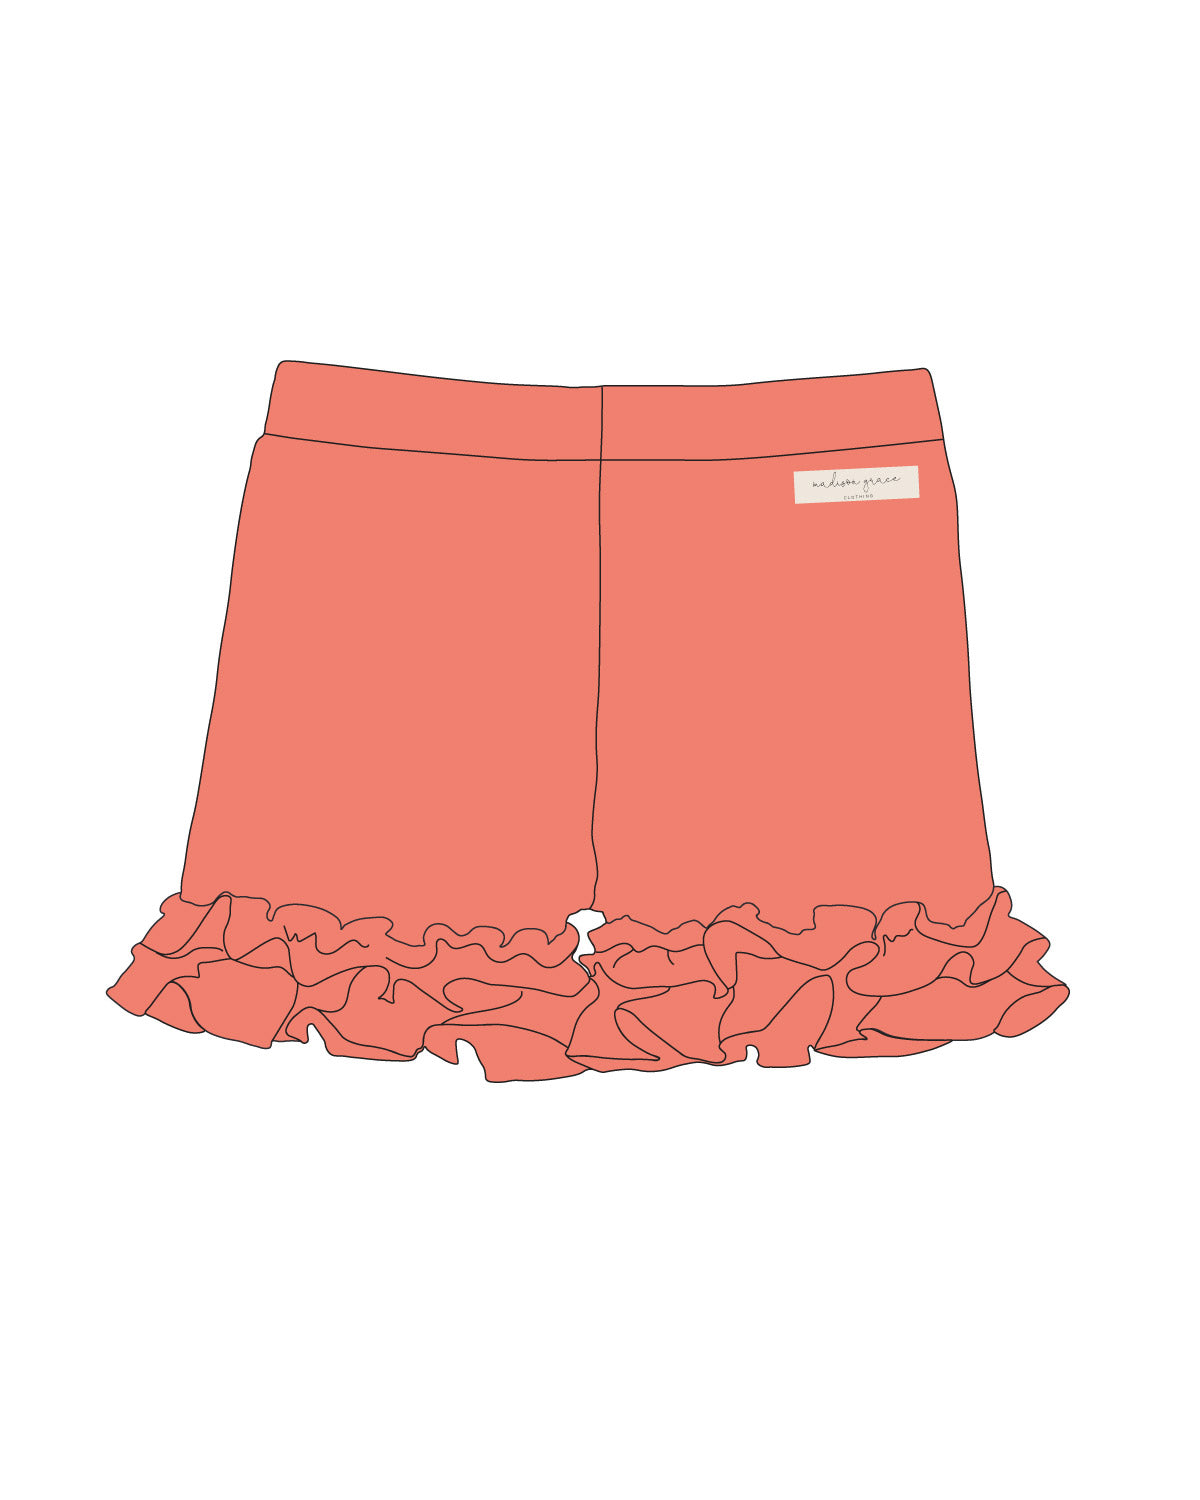 Ruffle Shorties - Coral - Love Millie Clothing